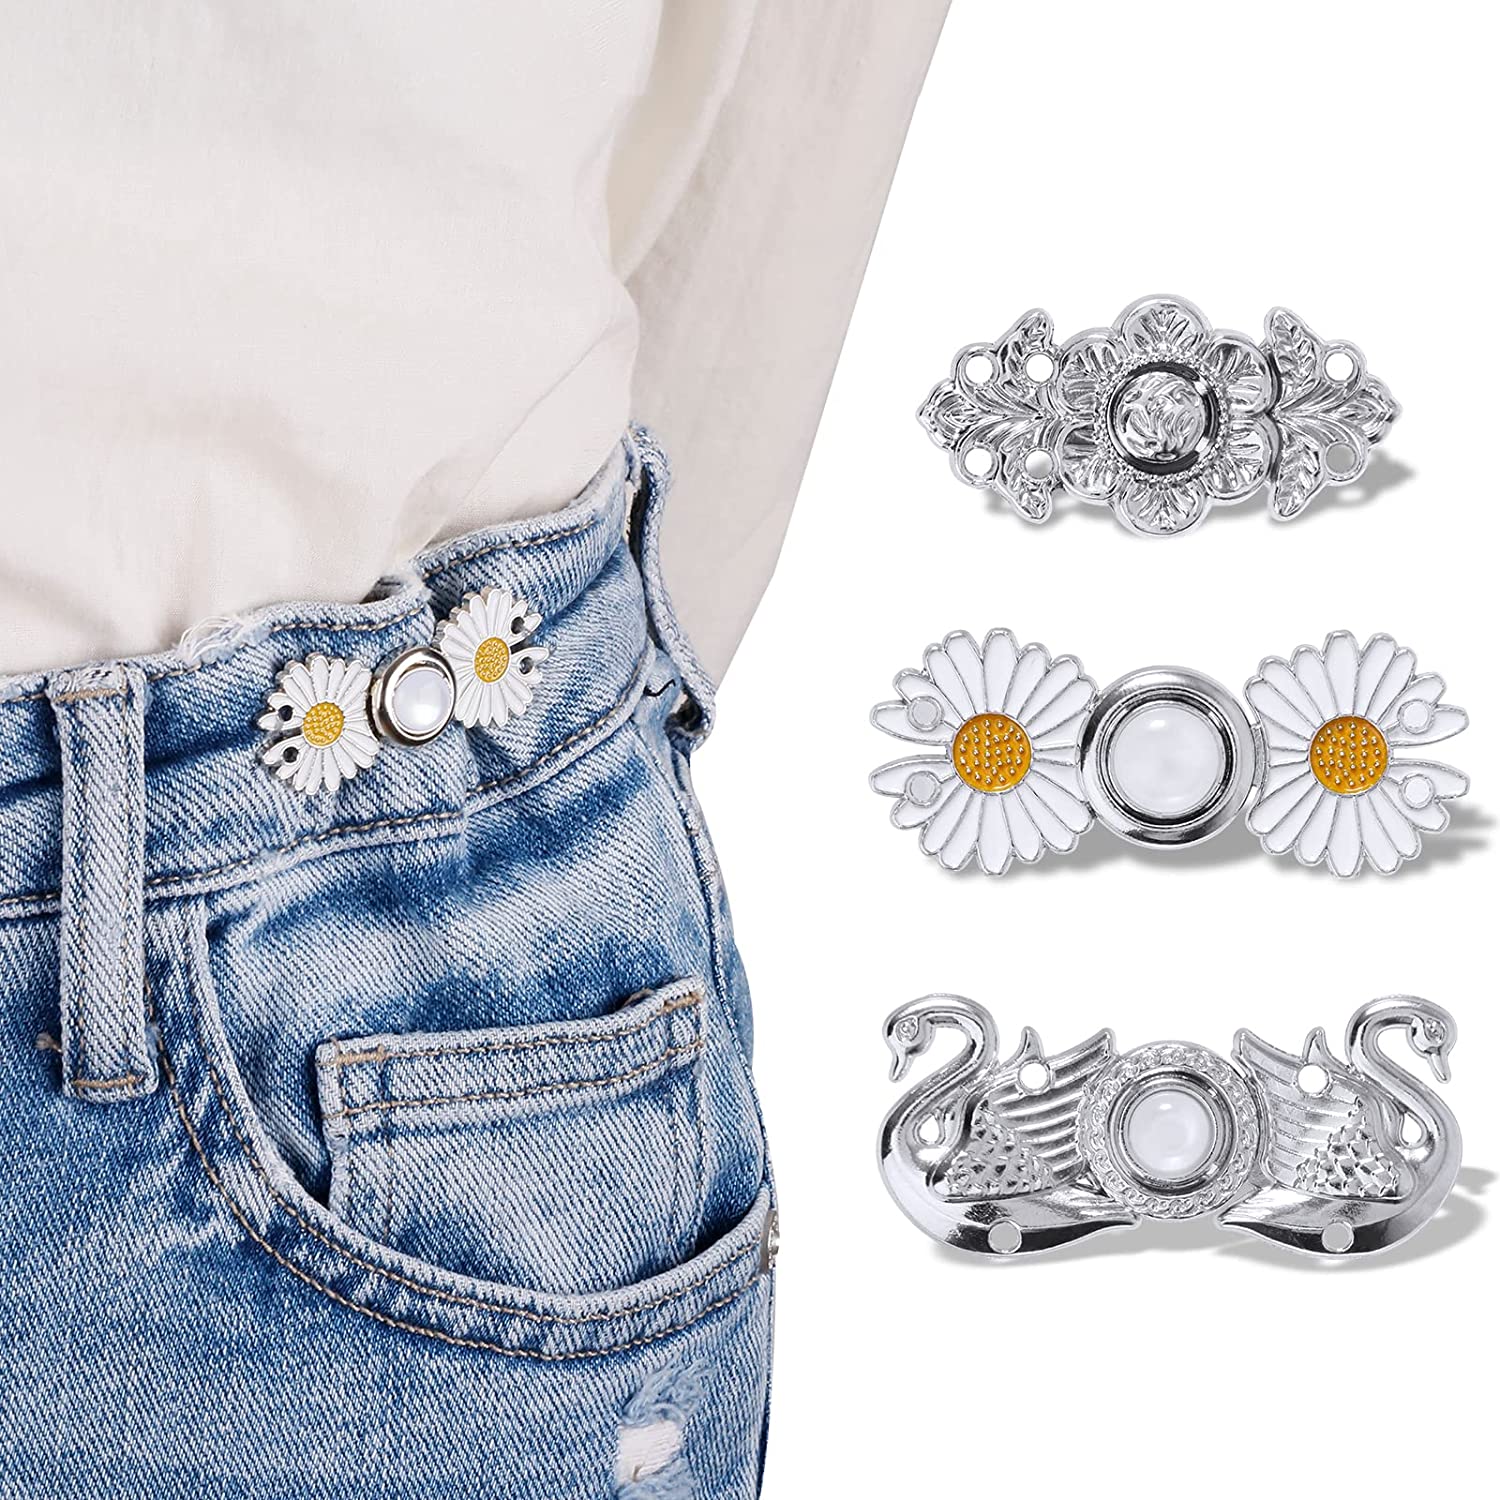  SEILETOO 6 Set Pant Waist Tightener, Bear and Daisy Flower Jean  Buttons Pins, Jean Buttons for Loose Jeans, No Sewing Required Pants Clips  for Waist